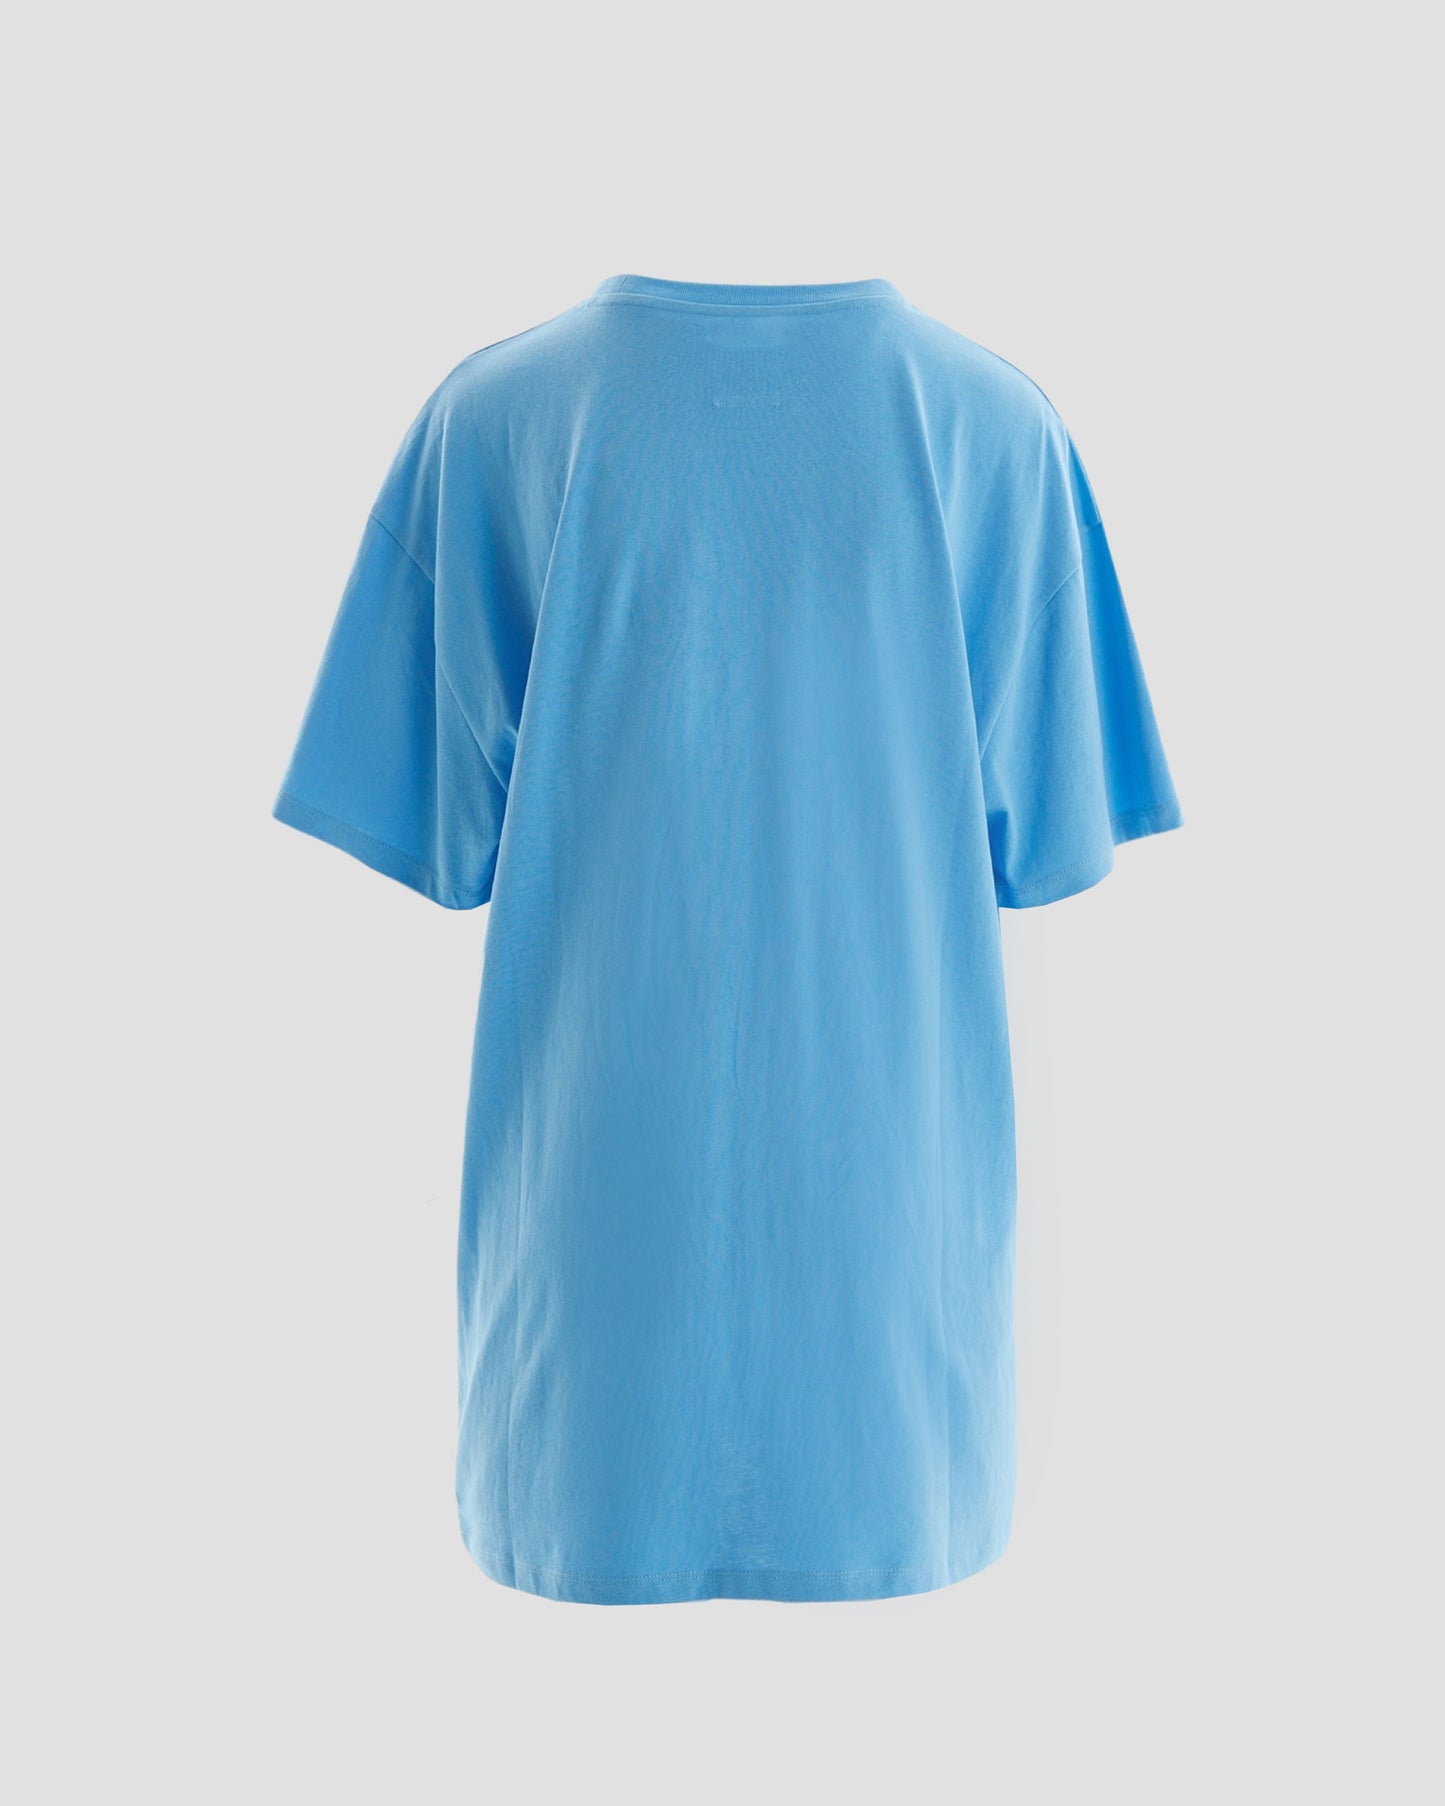 Nostalgia Graphic Oversized T-Shirt in Blue